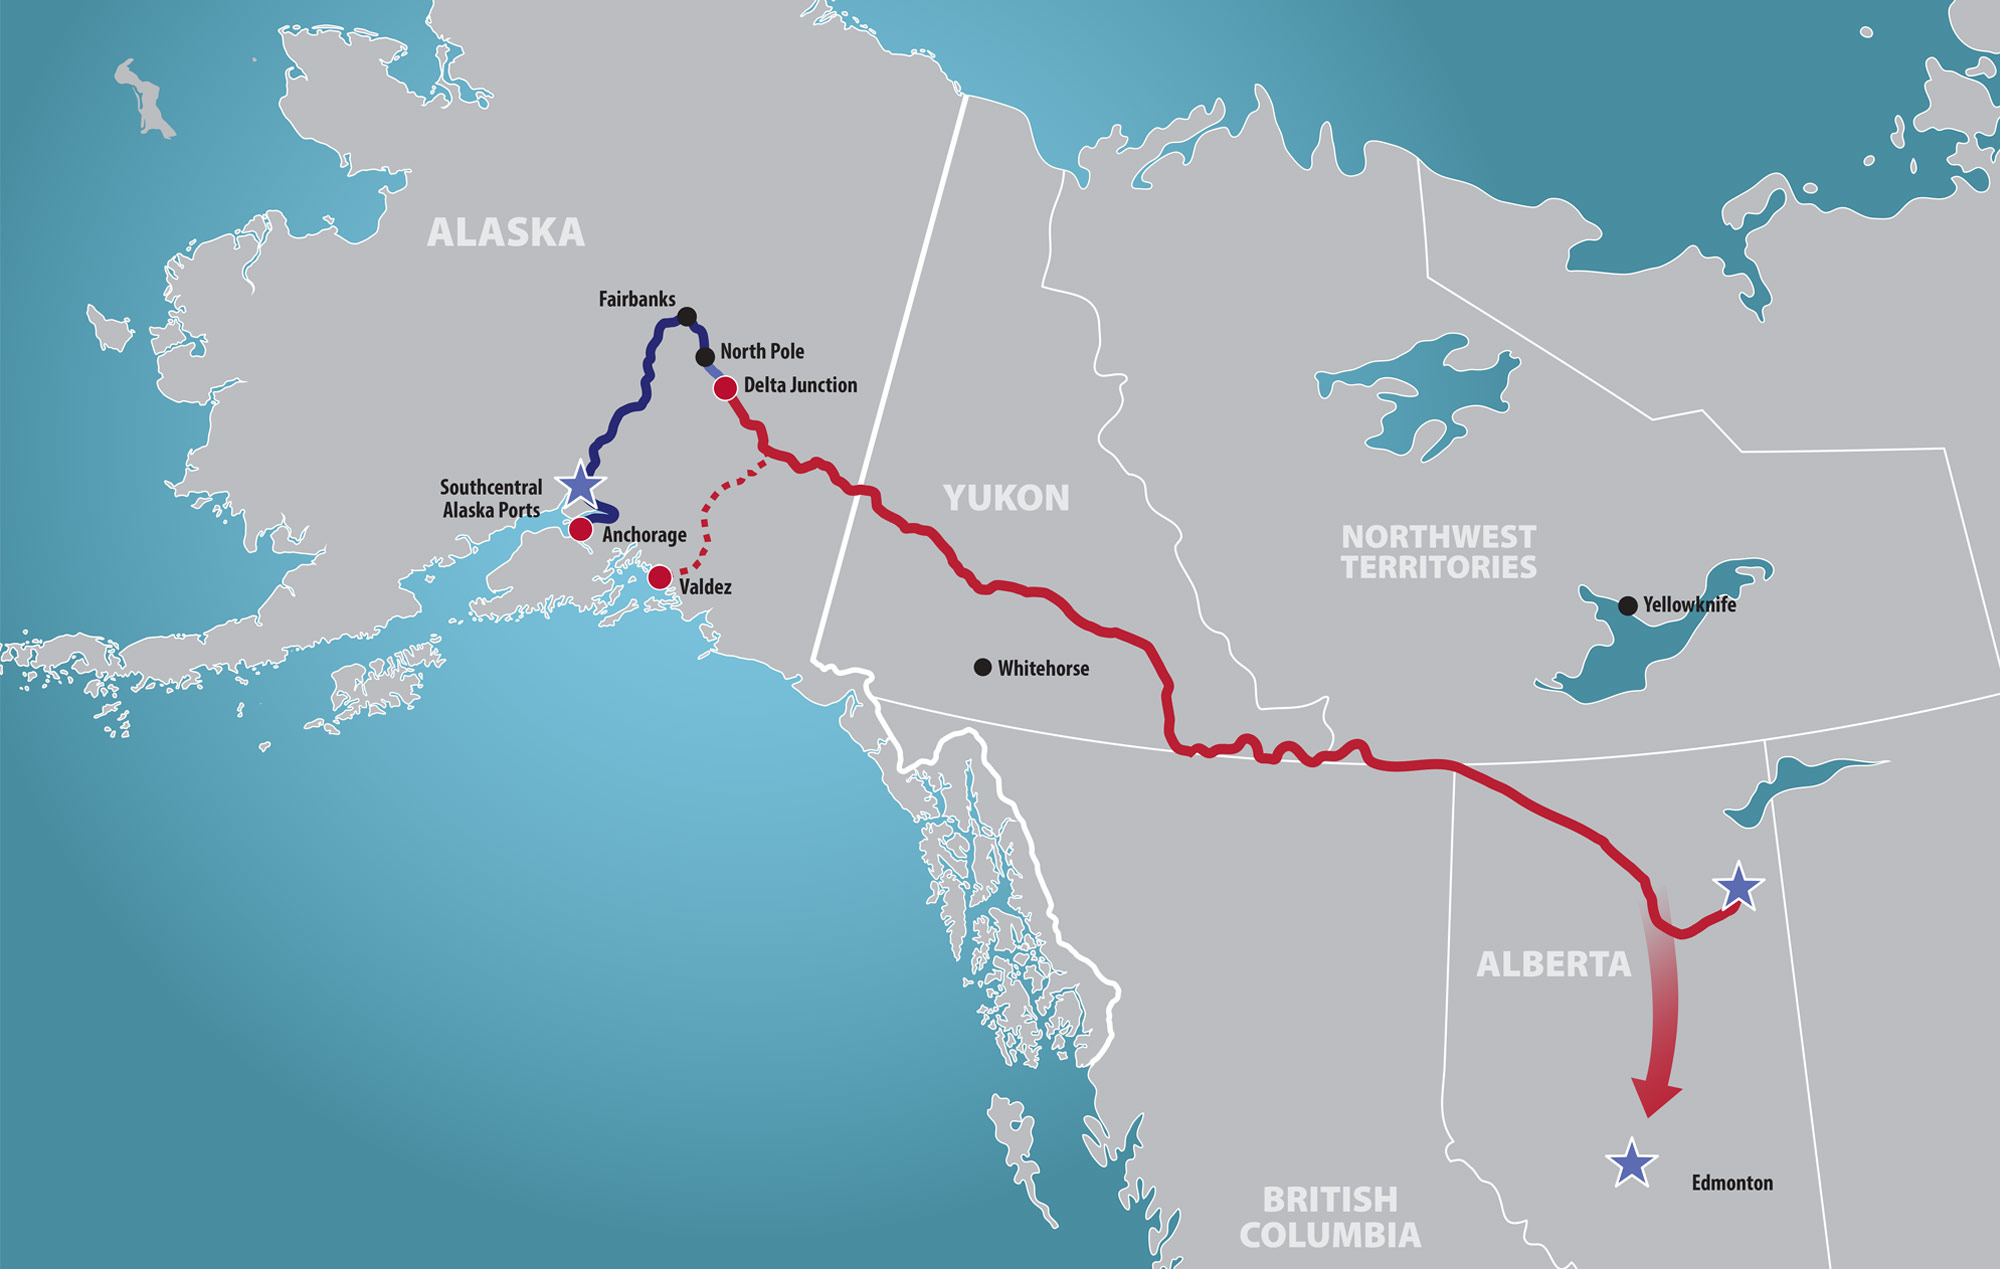 map of the upper northwest of North America displaying the tracks from Alaska to Alberta